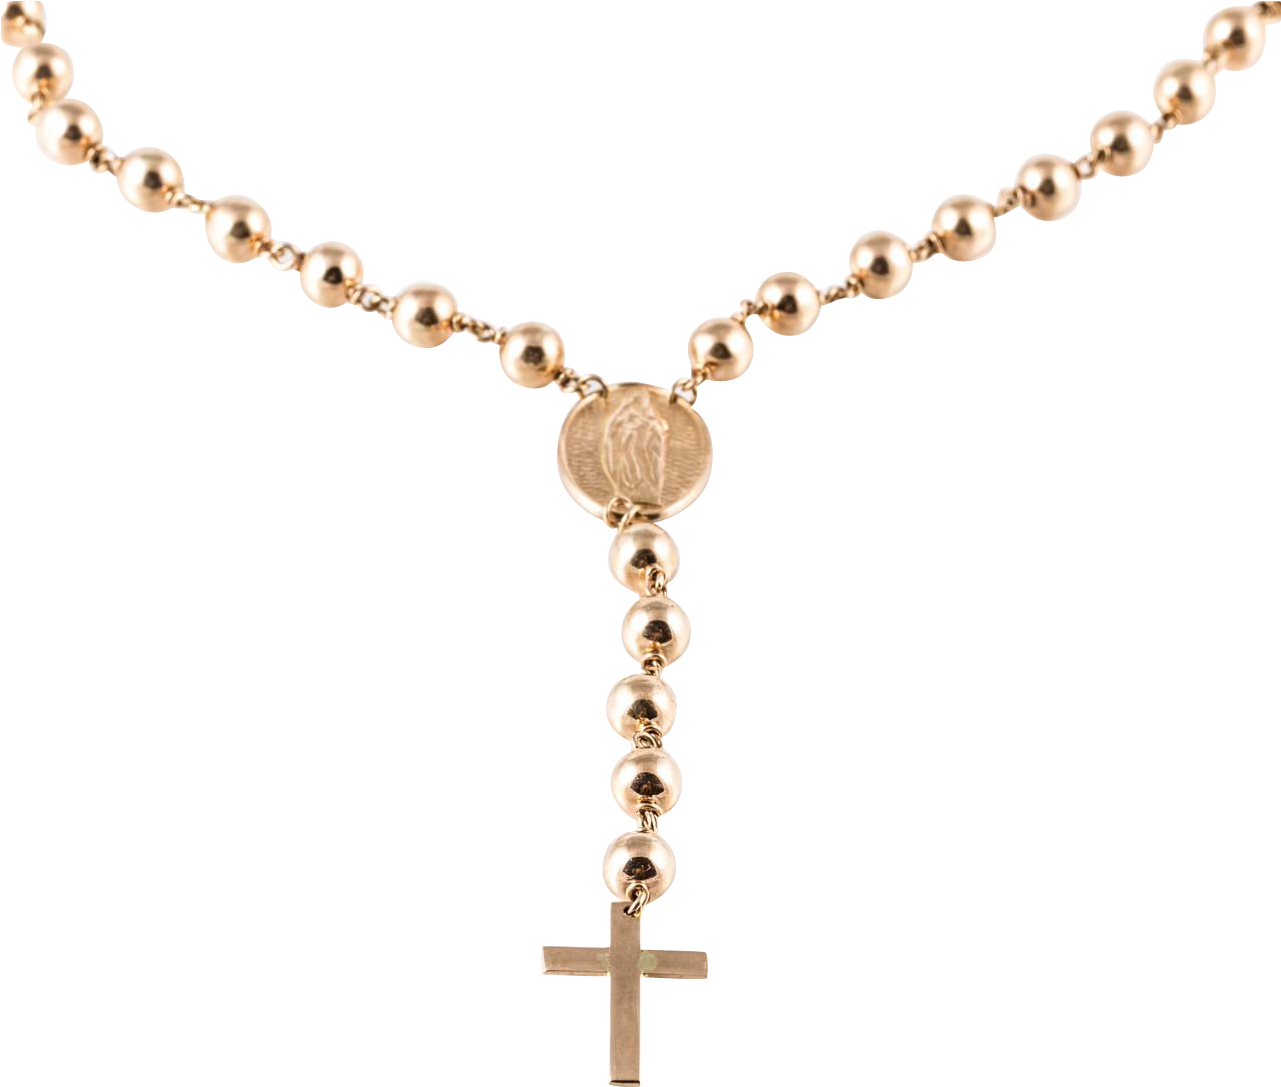 Rosary Png Images - Free Logo Image